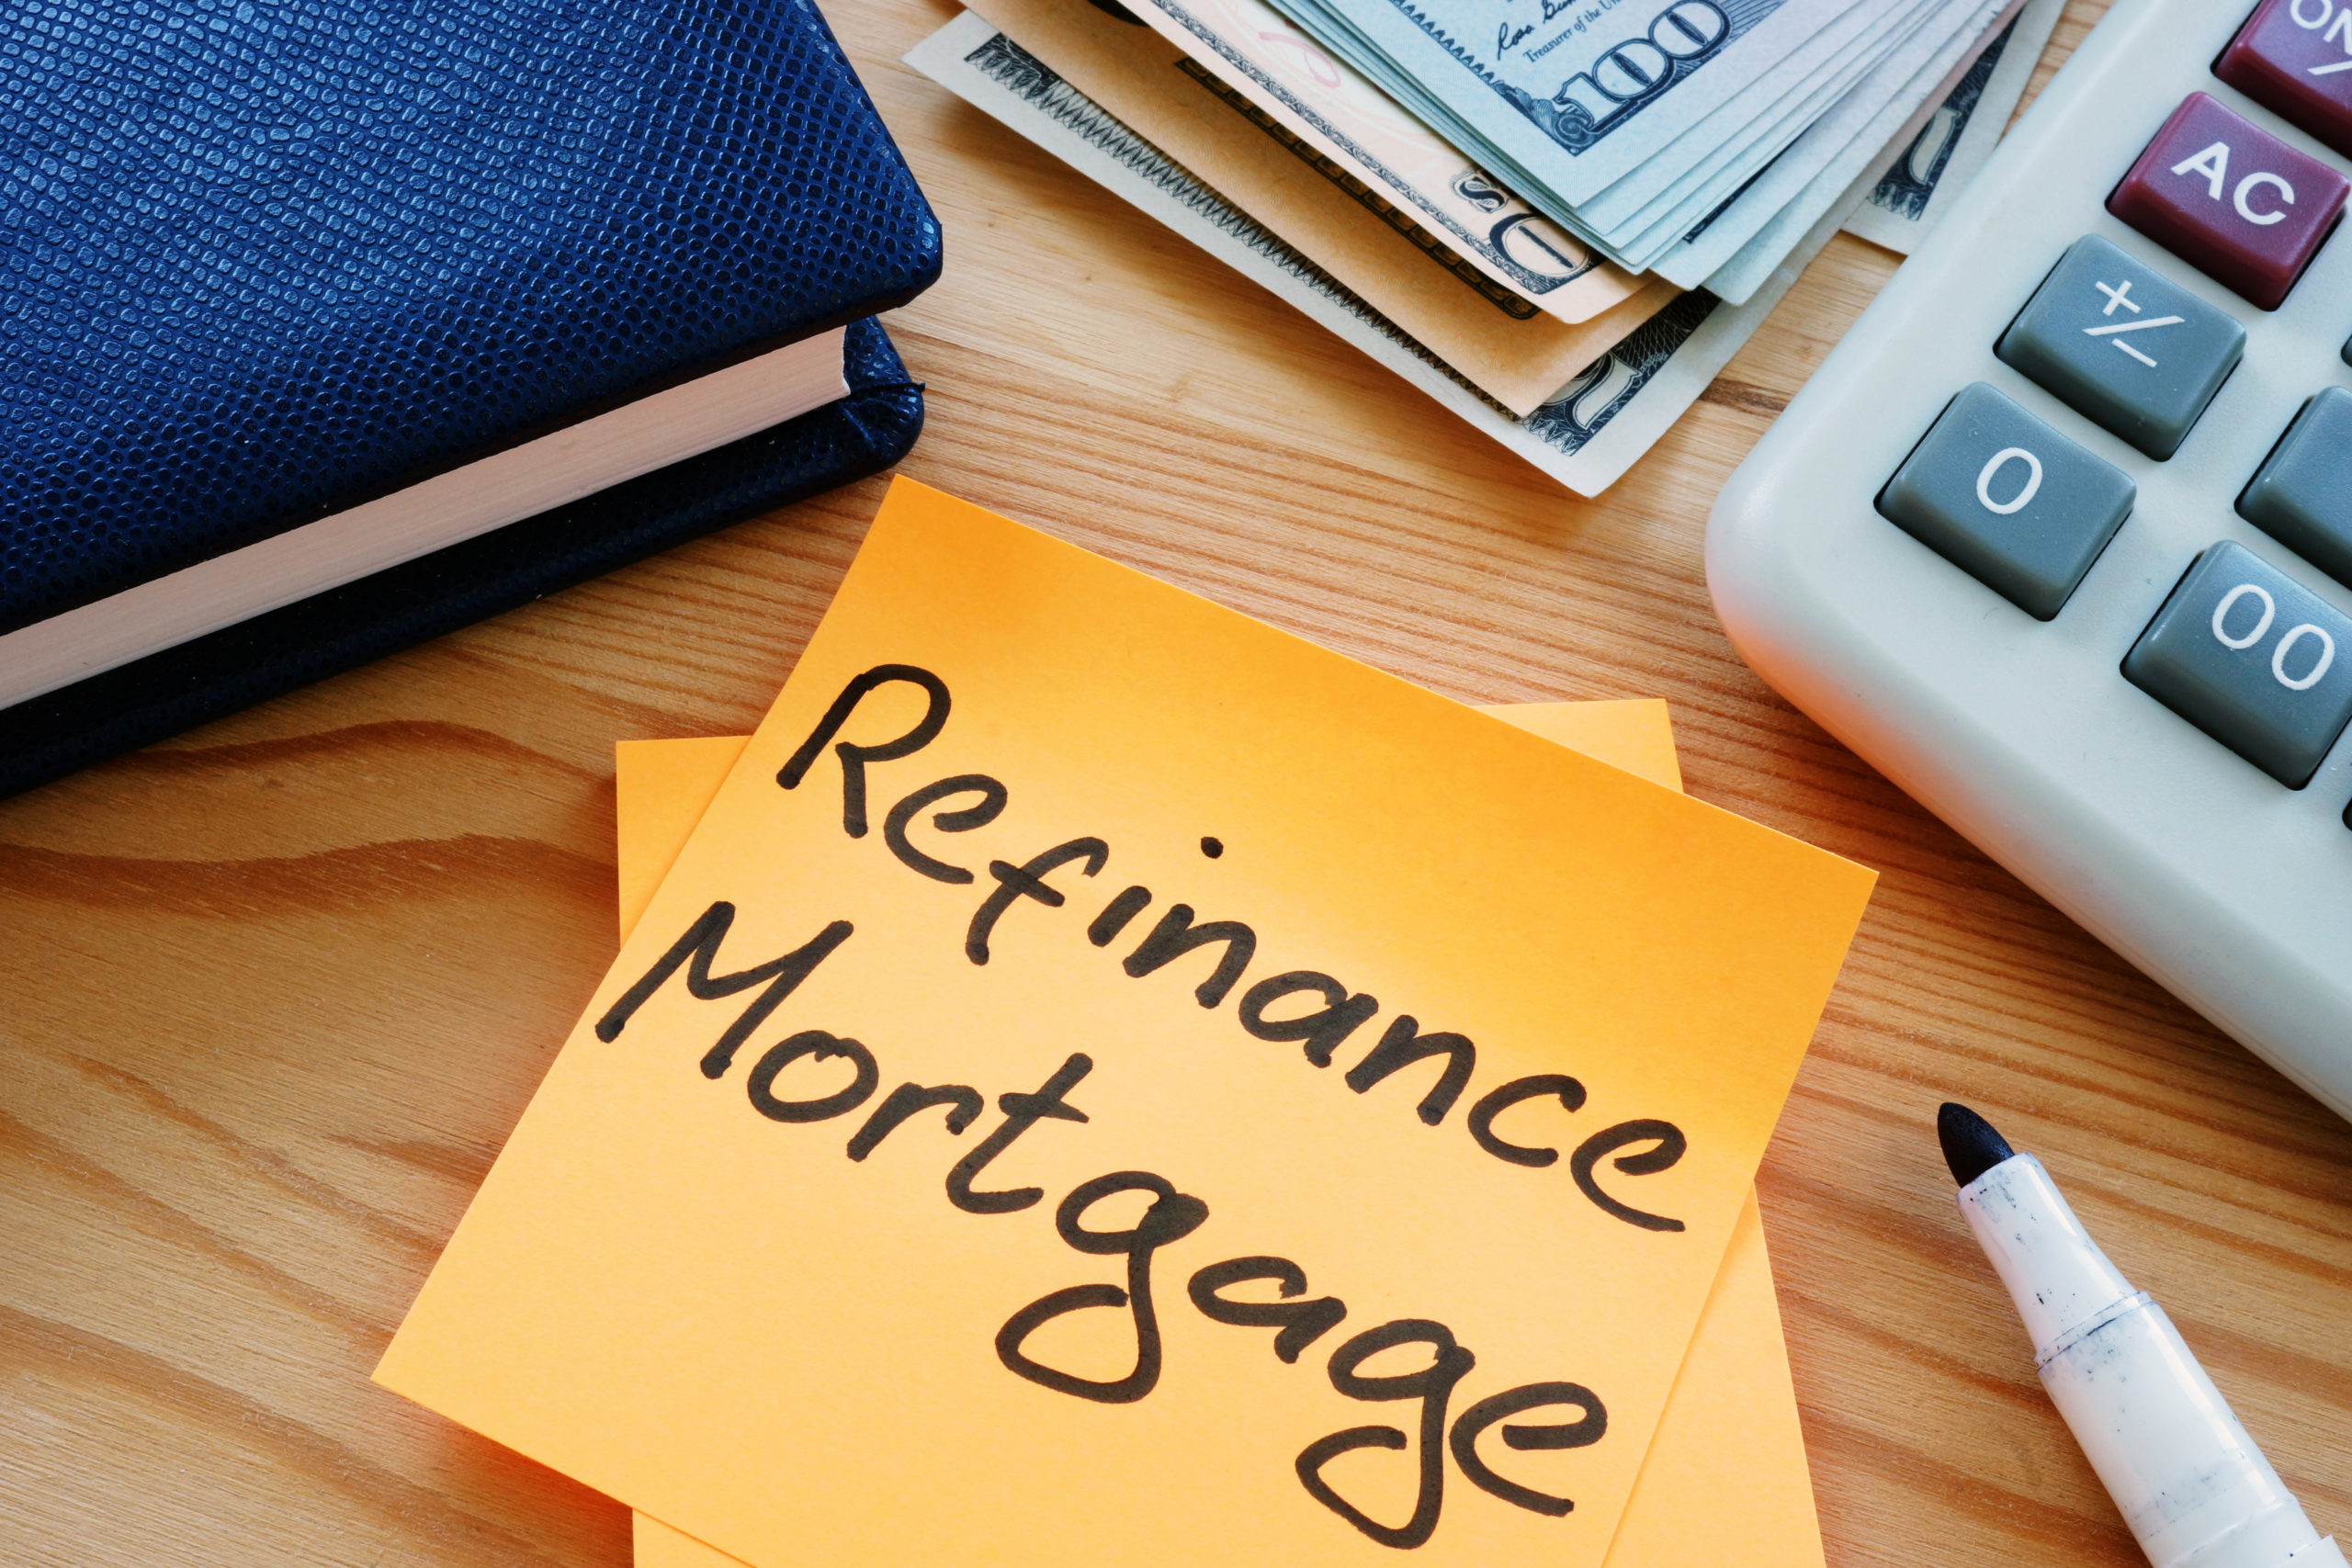 low-rates-offer-an-opportunity-to-refinance-resource-financial-services